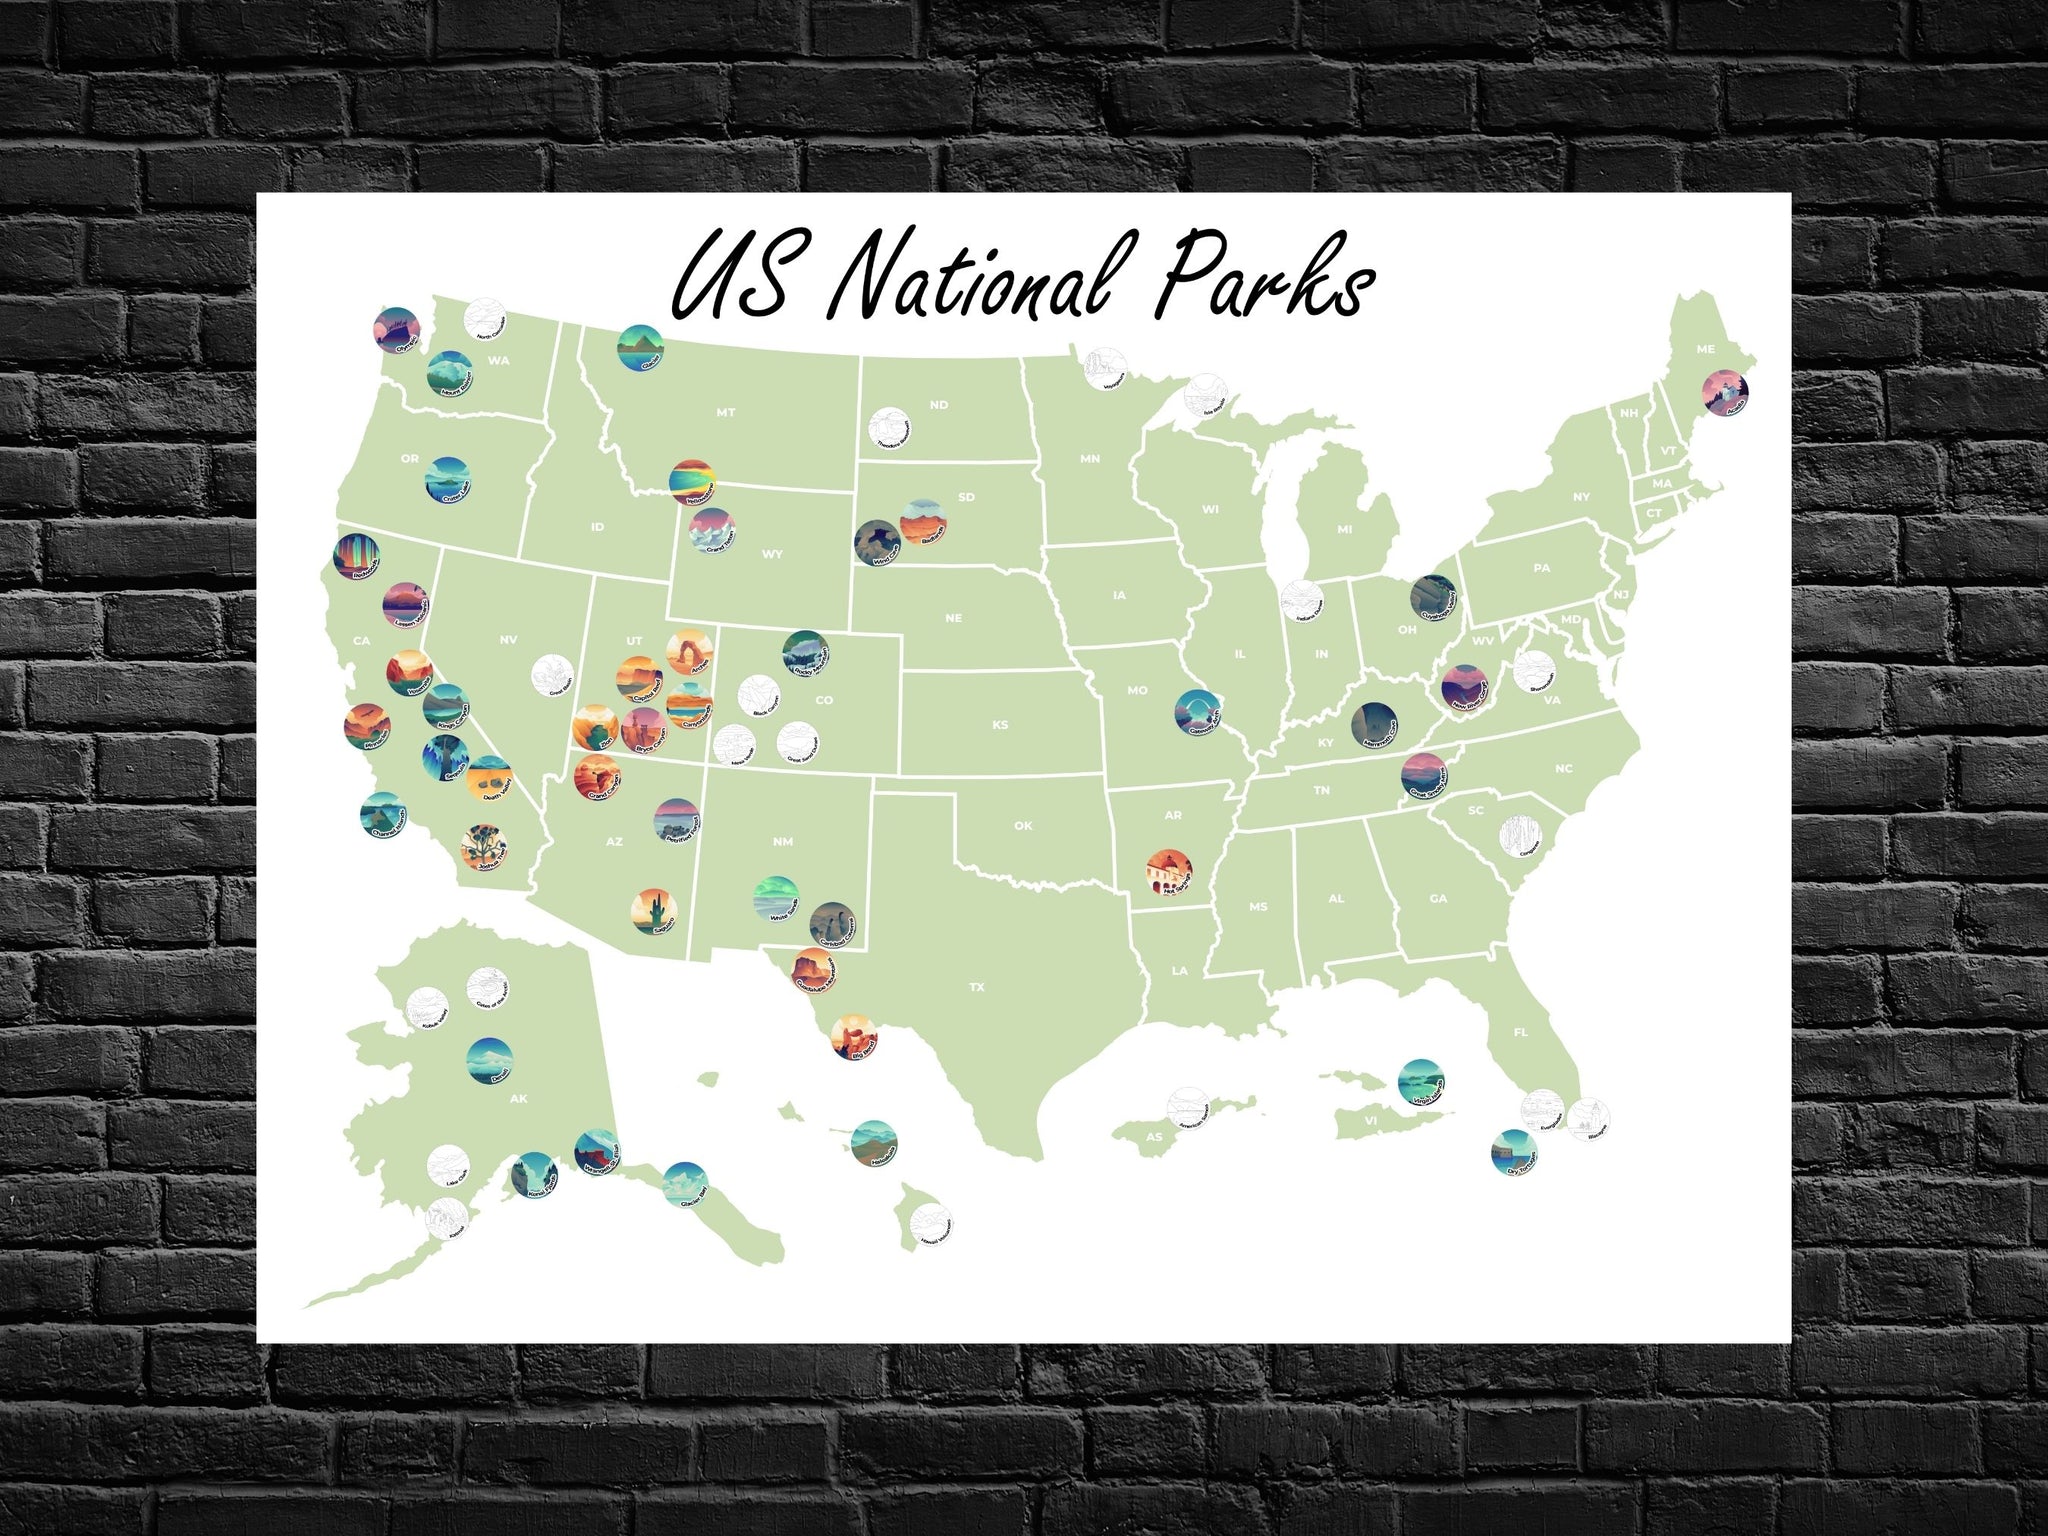 About Our Stores - America's National Parks